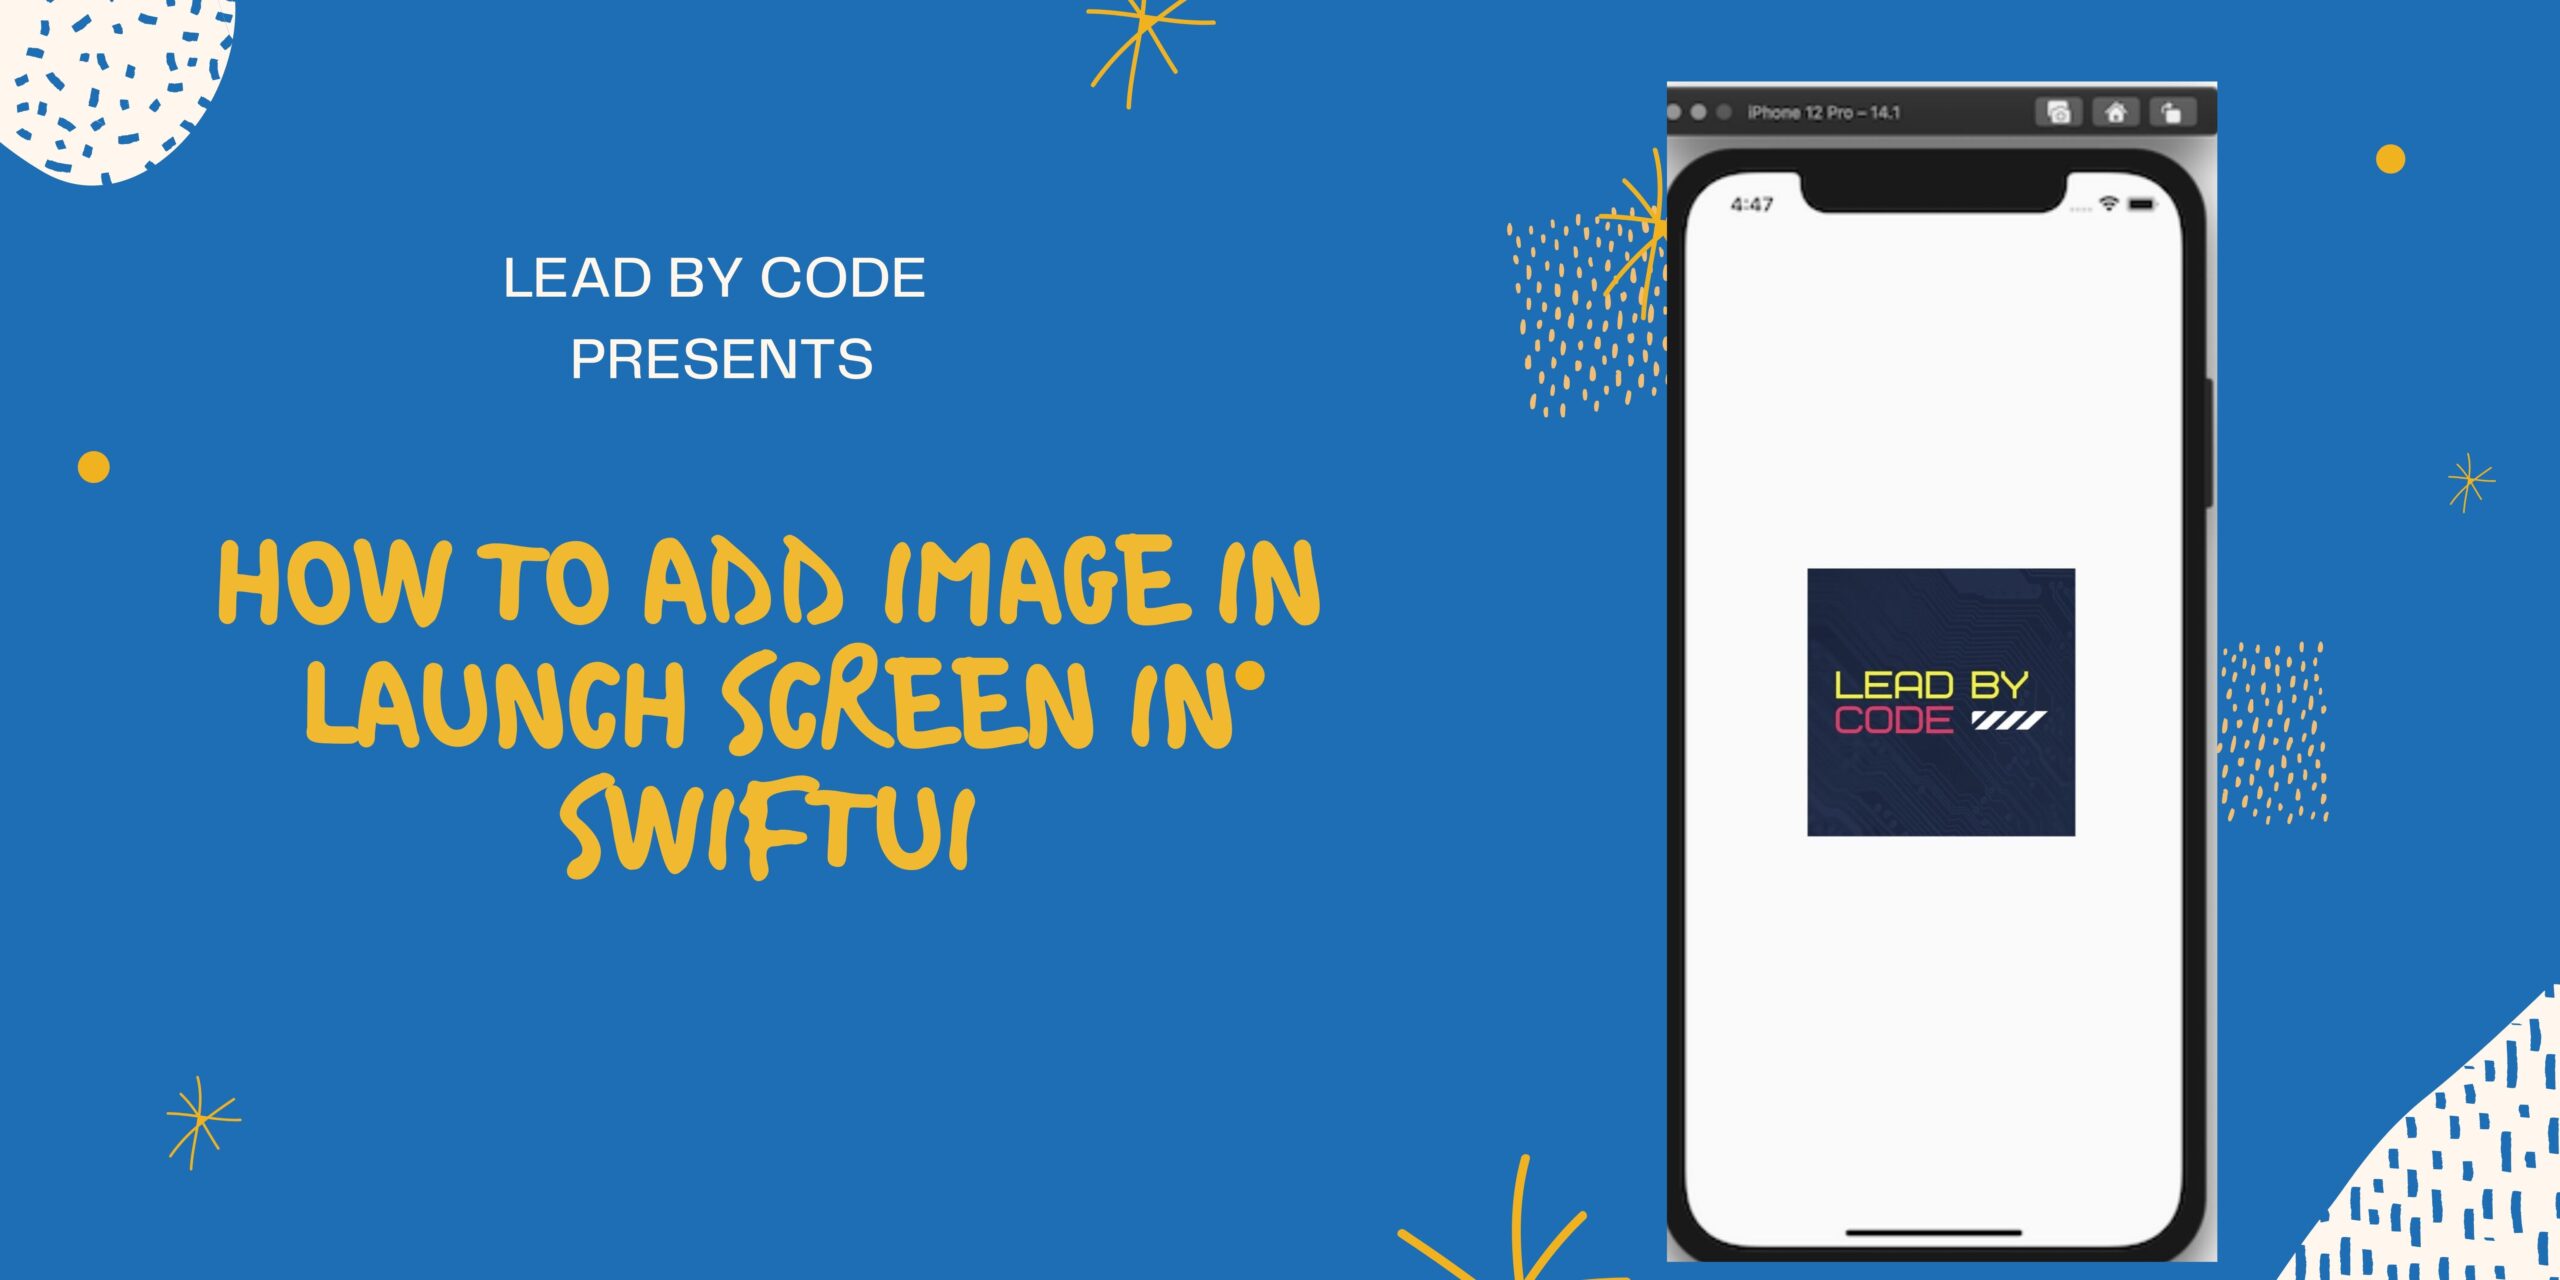 How to add Image in Launch Screen in SwiftUI